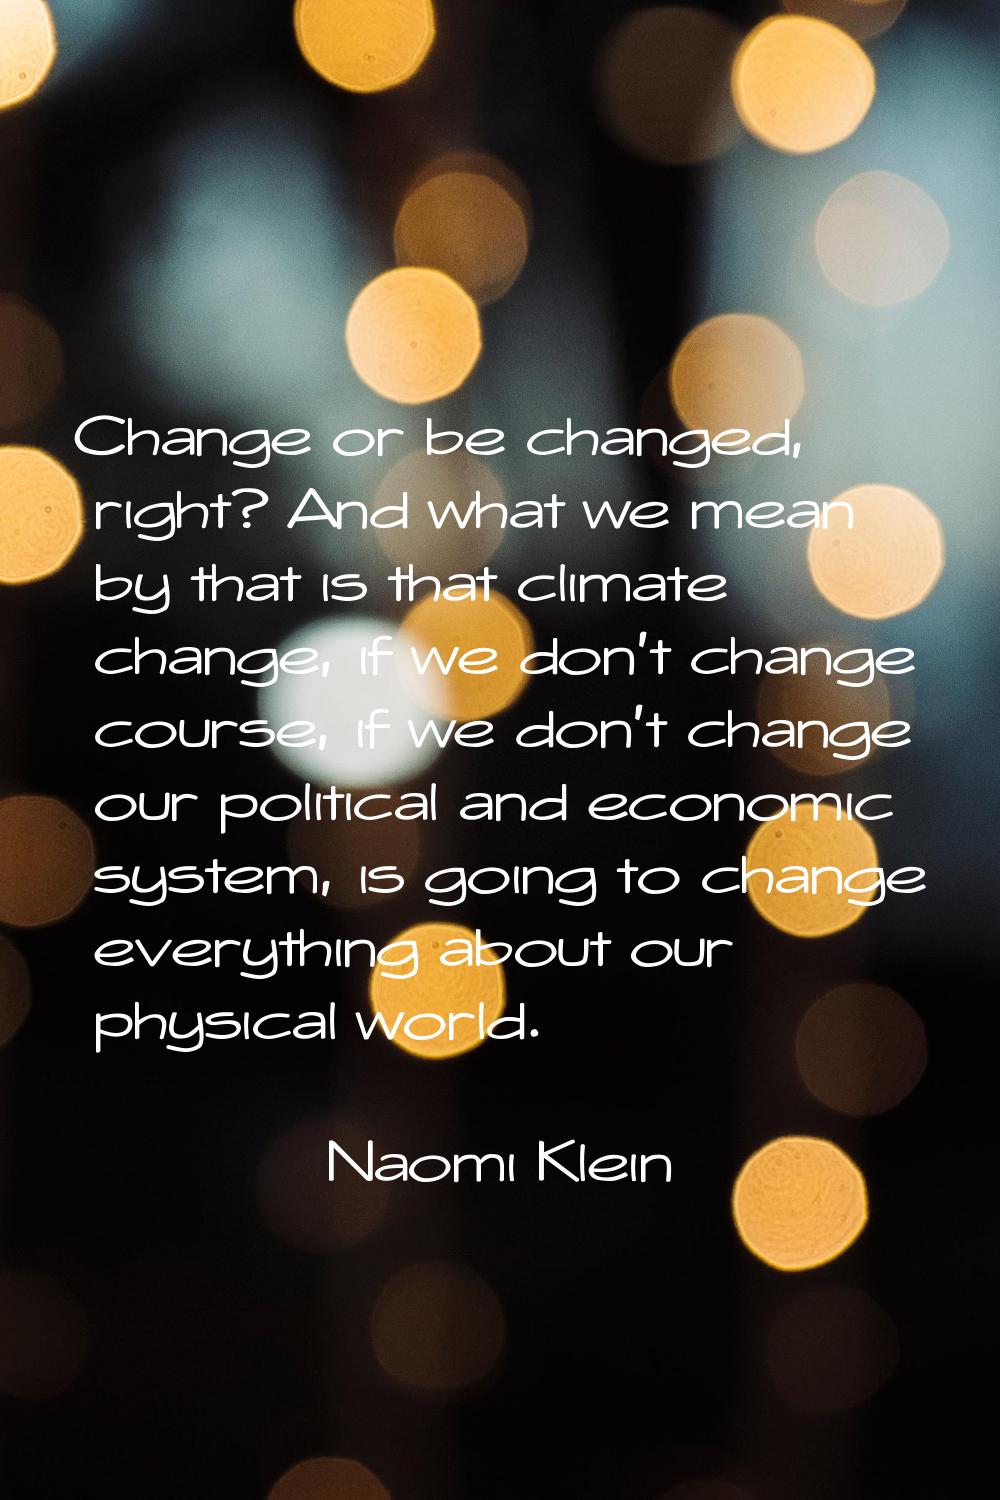 Change or be changed, right? And what we mean by that is that climate change, if we don't change co